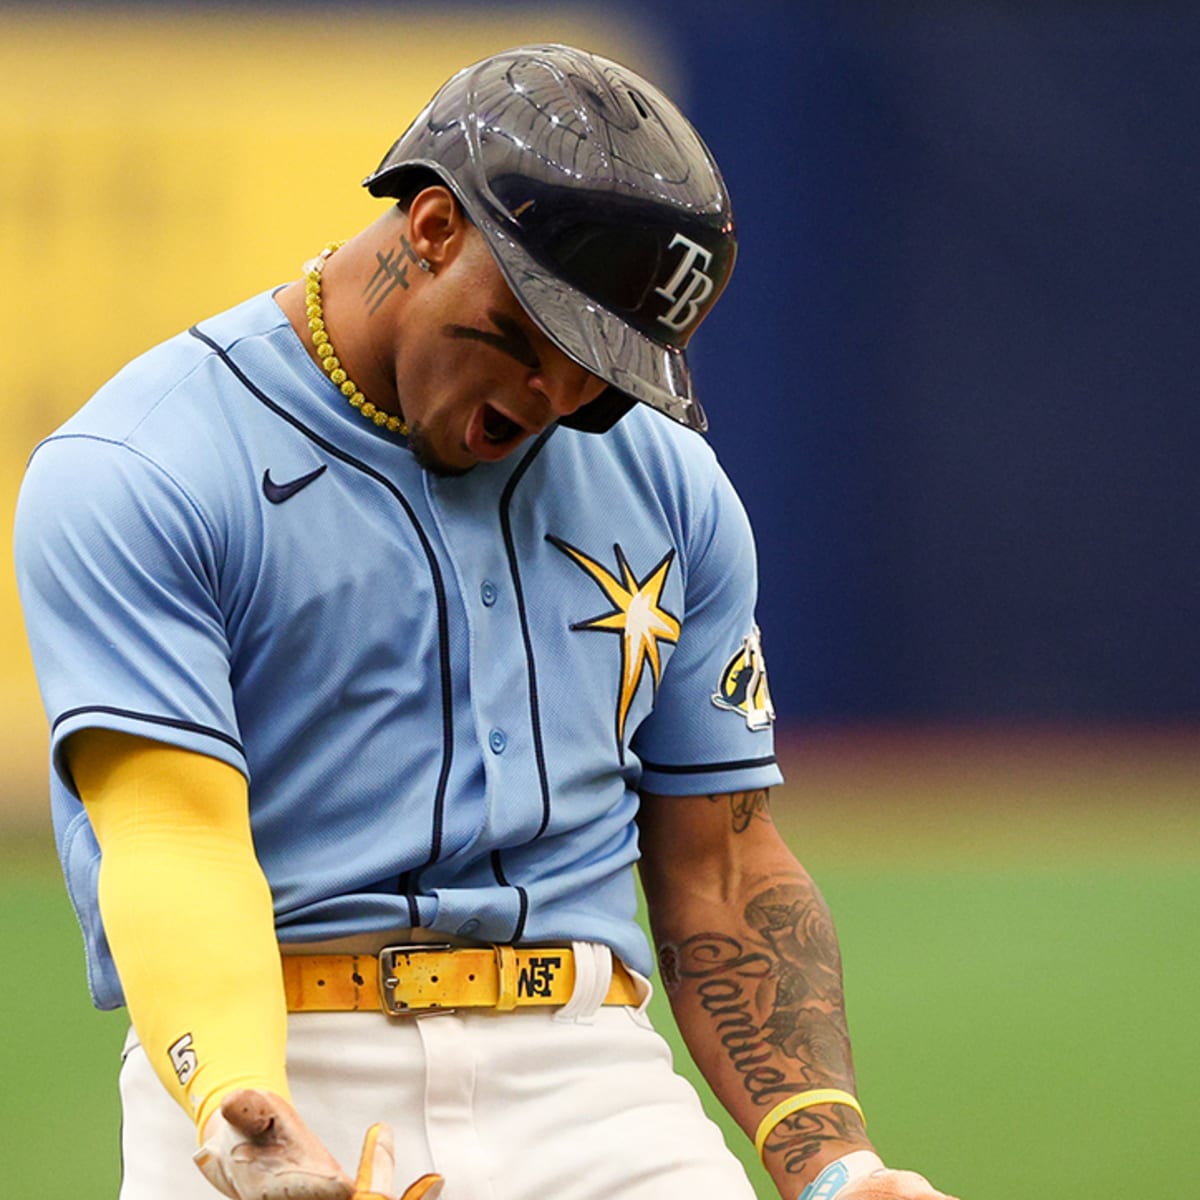 Rays shortstop Wander Franco back in lineup after 2-day benching